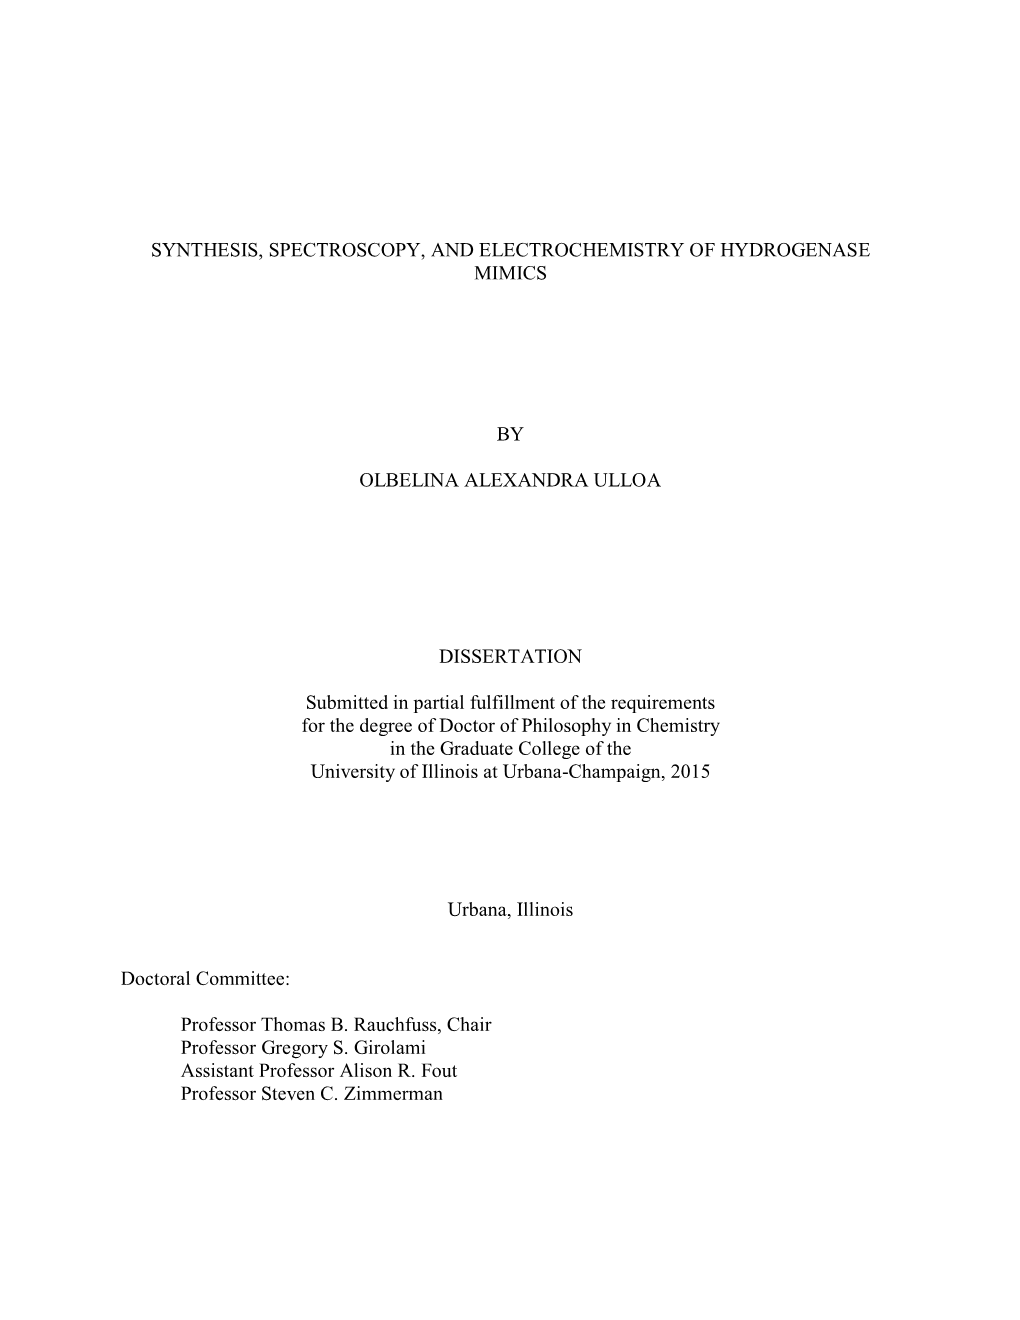 SYNTHESIS, SPECTROSCOPY, and ELECTROCHEMISTRY of HYDROGENASE MIMICS by OLBELINA ALEXANDRA ULLOA DISSERTATION Submitted in Partia